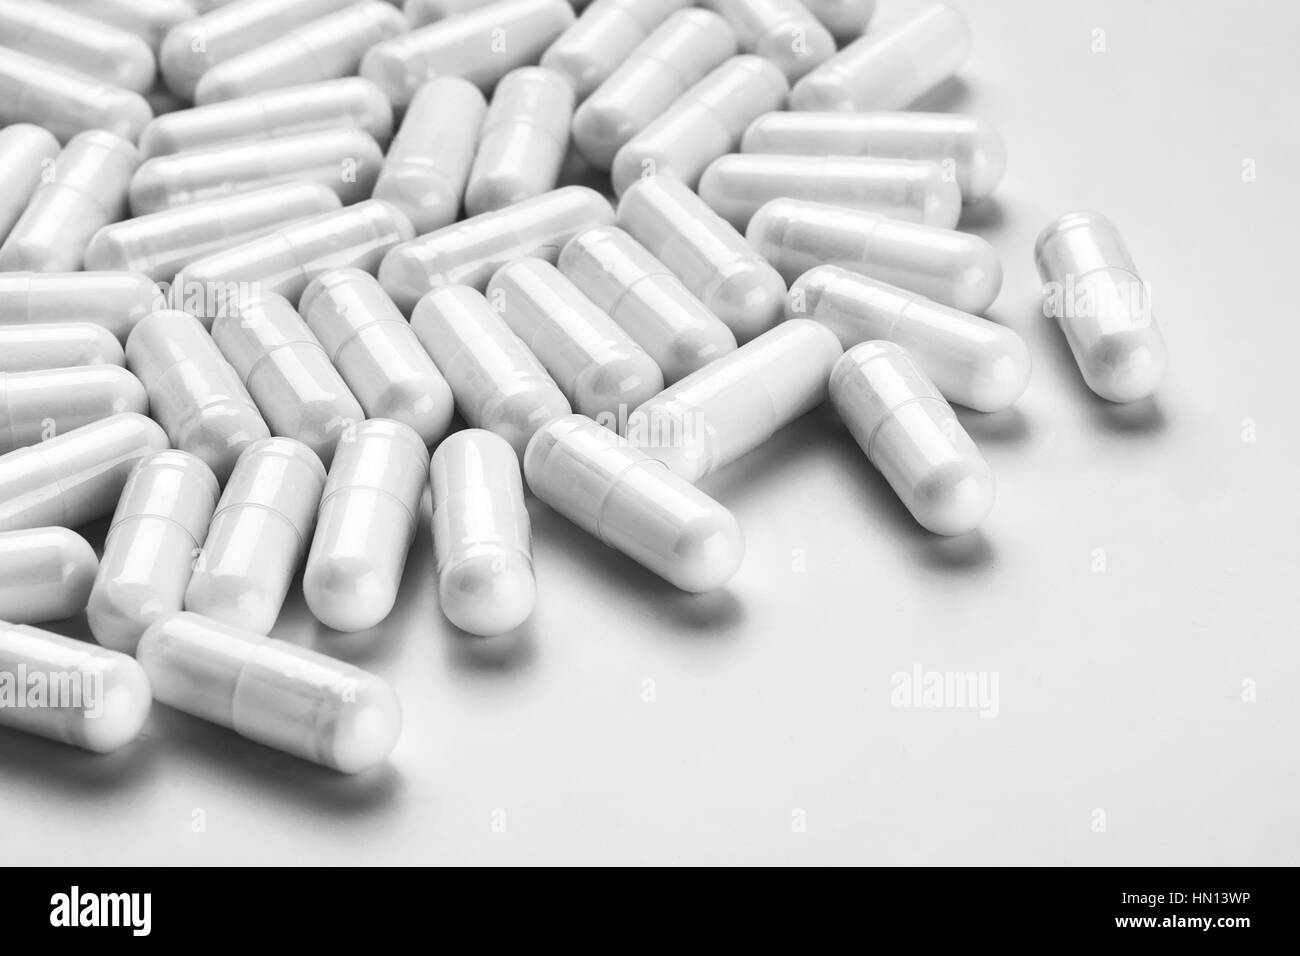 Many medicine capsules on gray background. High resolution product. Health care concept Stock Photo